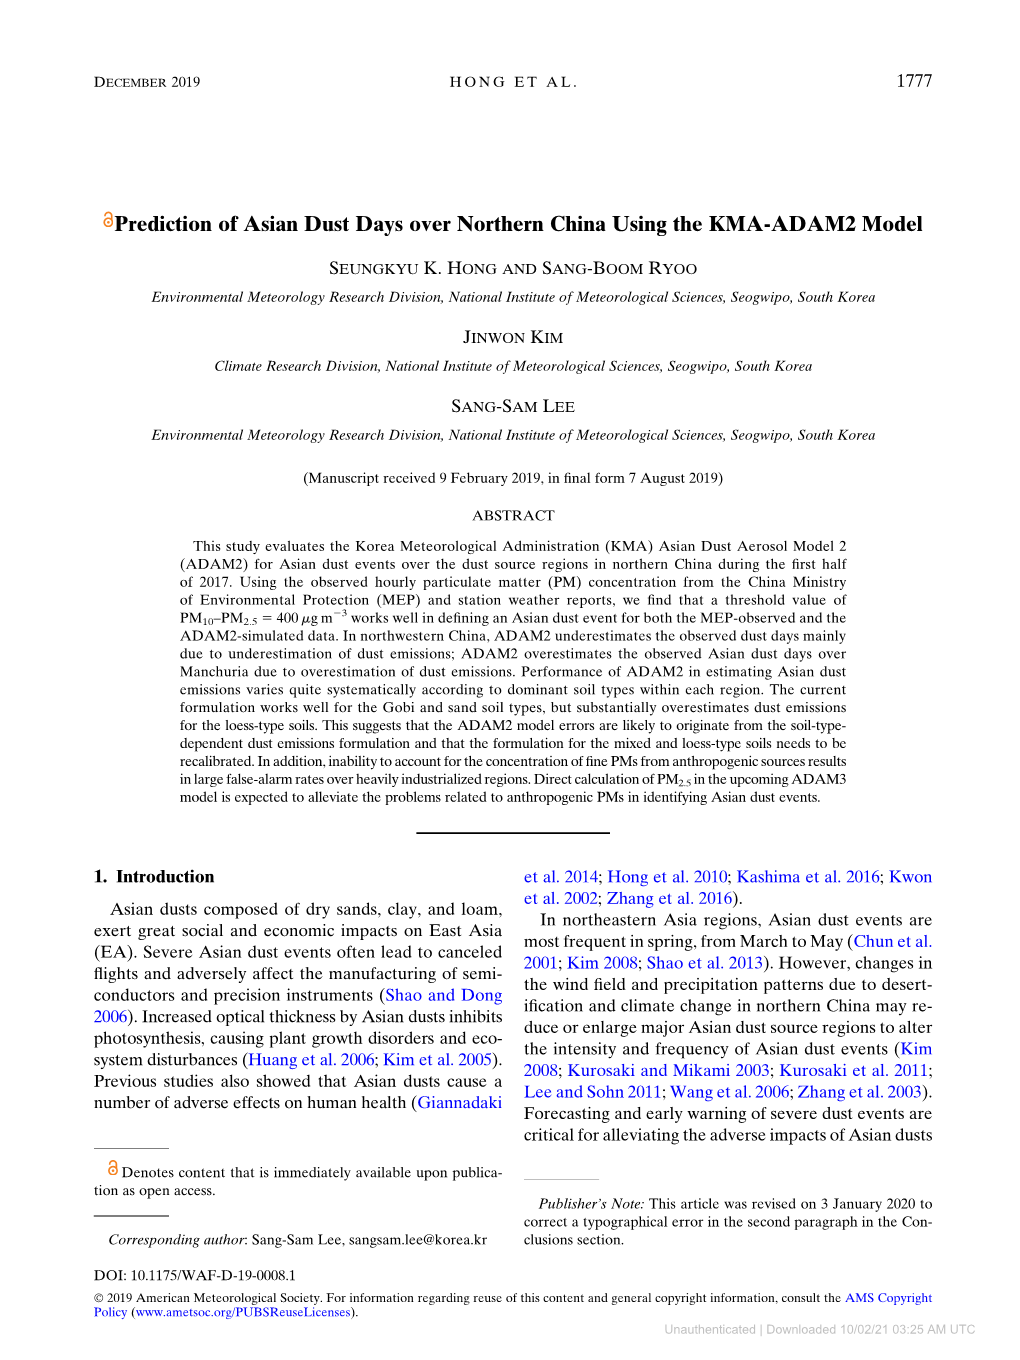 Prediction of Asian Dust Days Over Northern China Using the KMA-ADAM2 Model